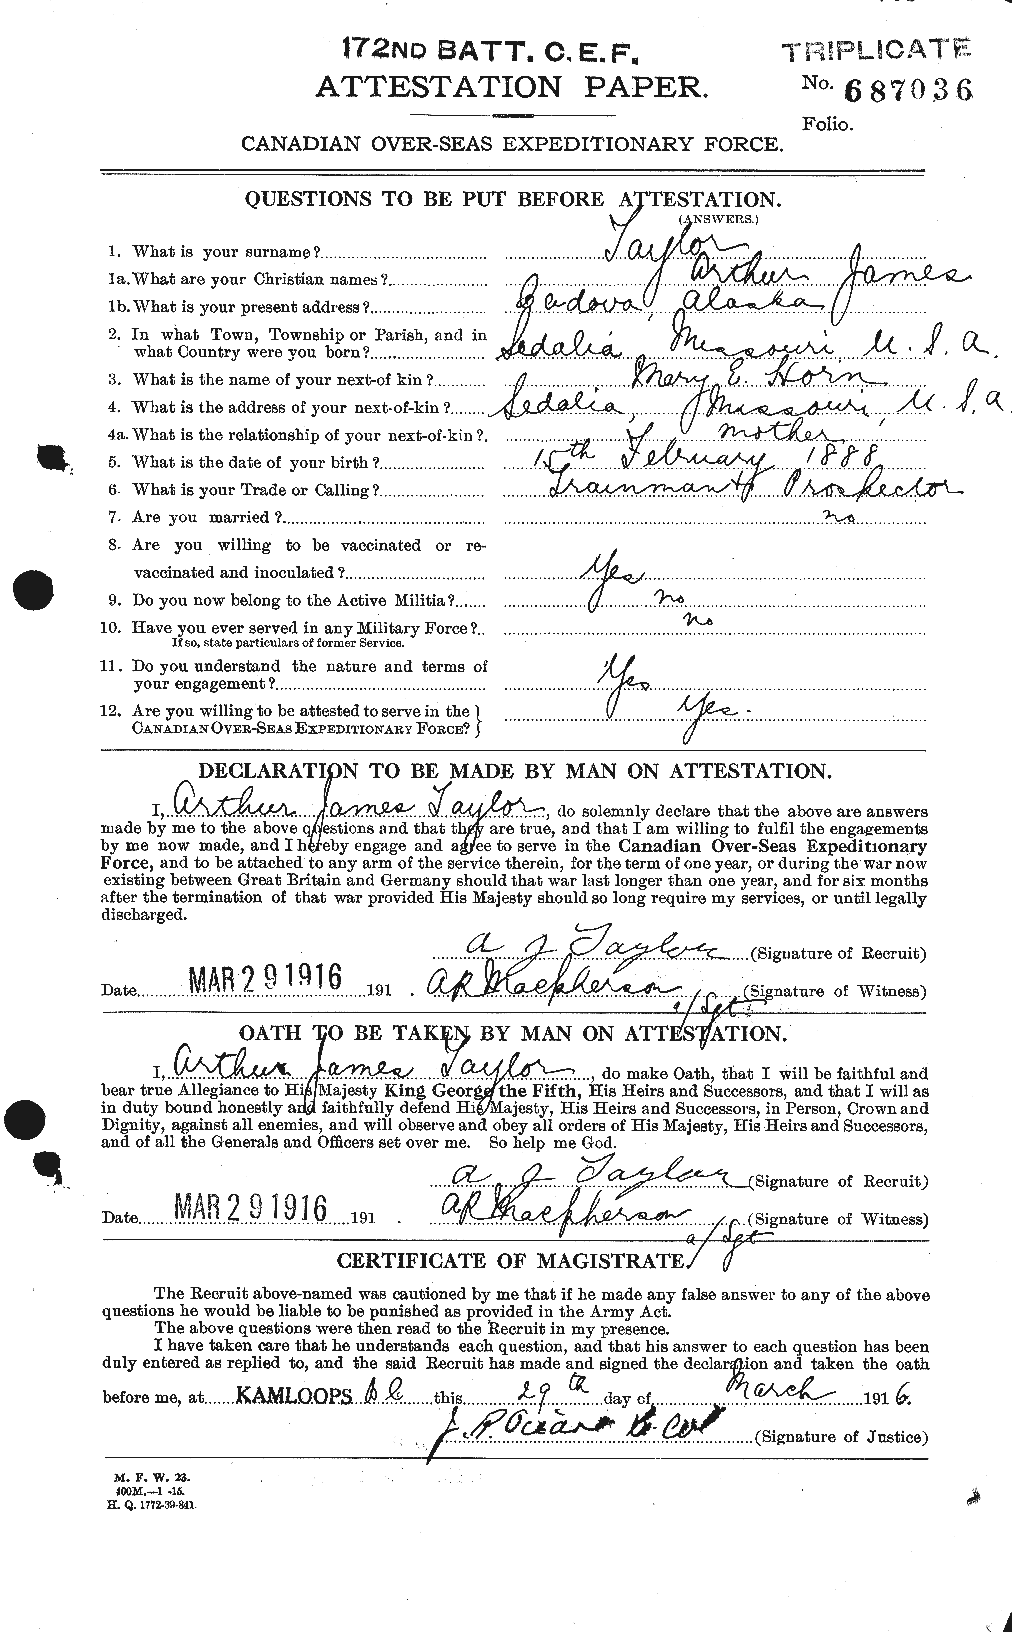 Personnel Records of the First World War - CEF 626732a